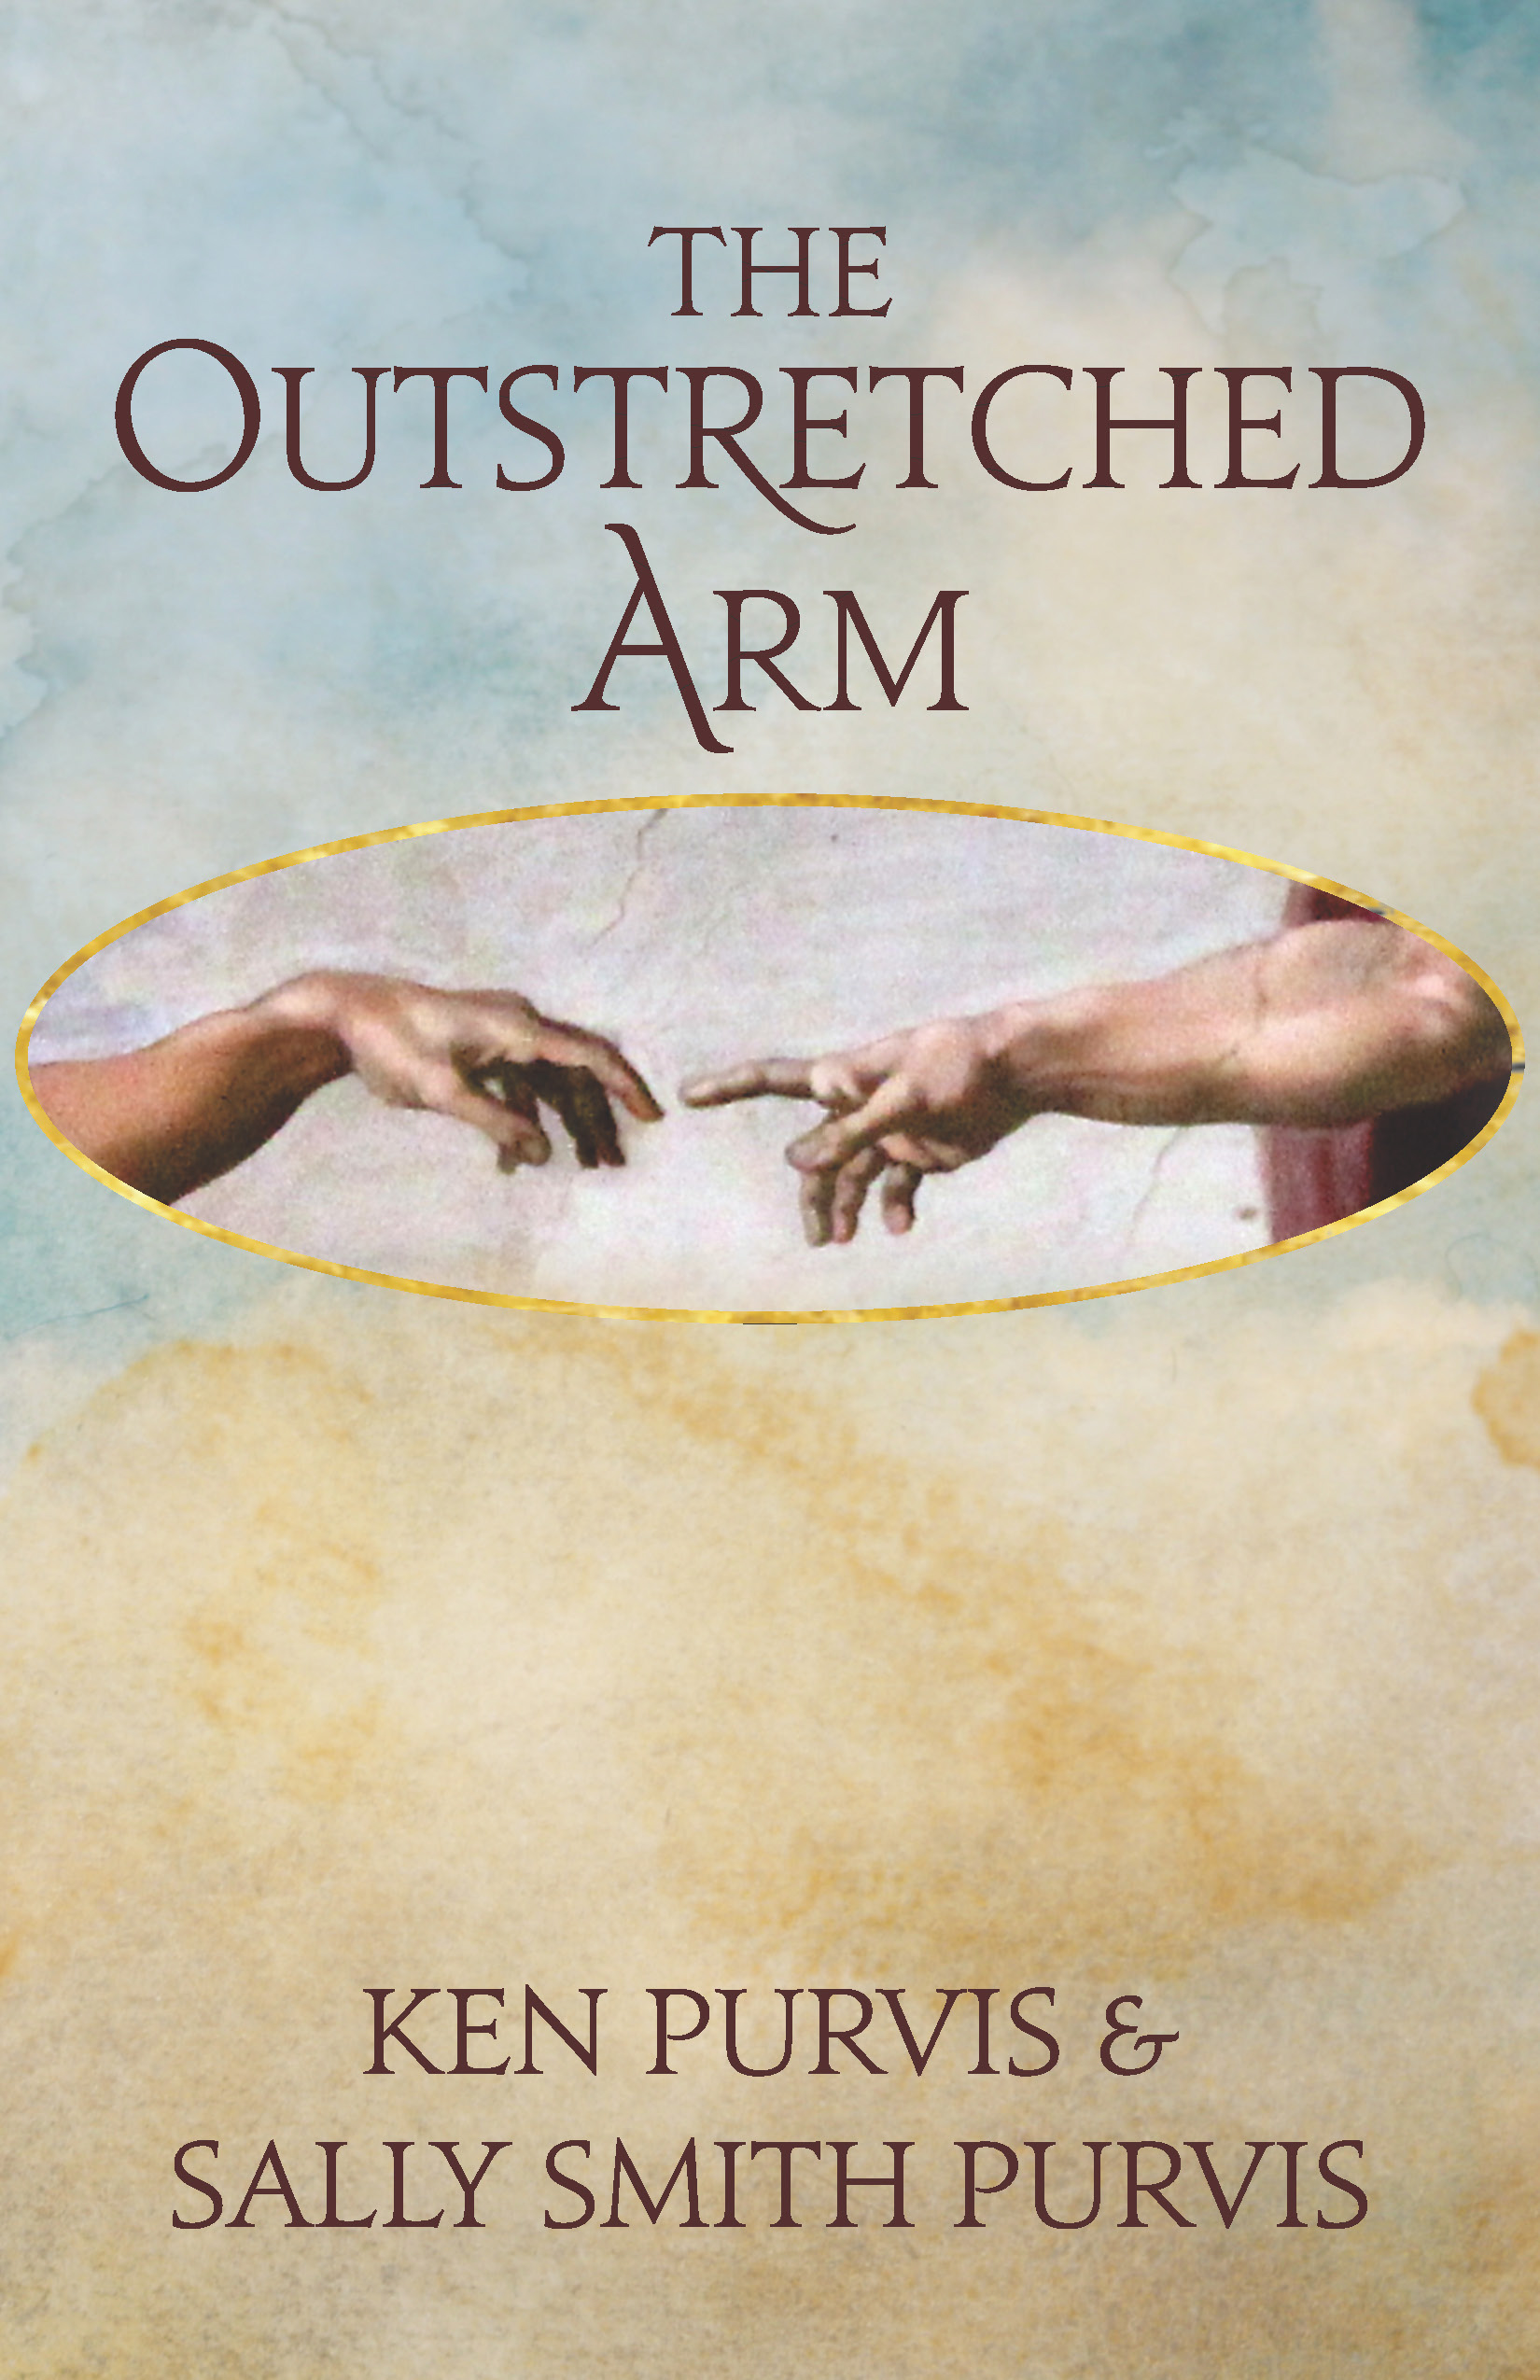 The Outstretched Arm